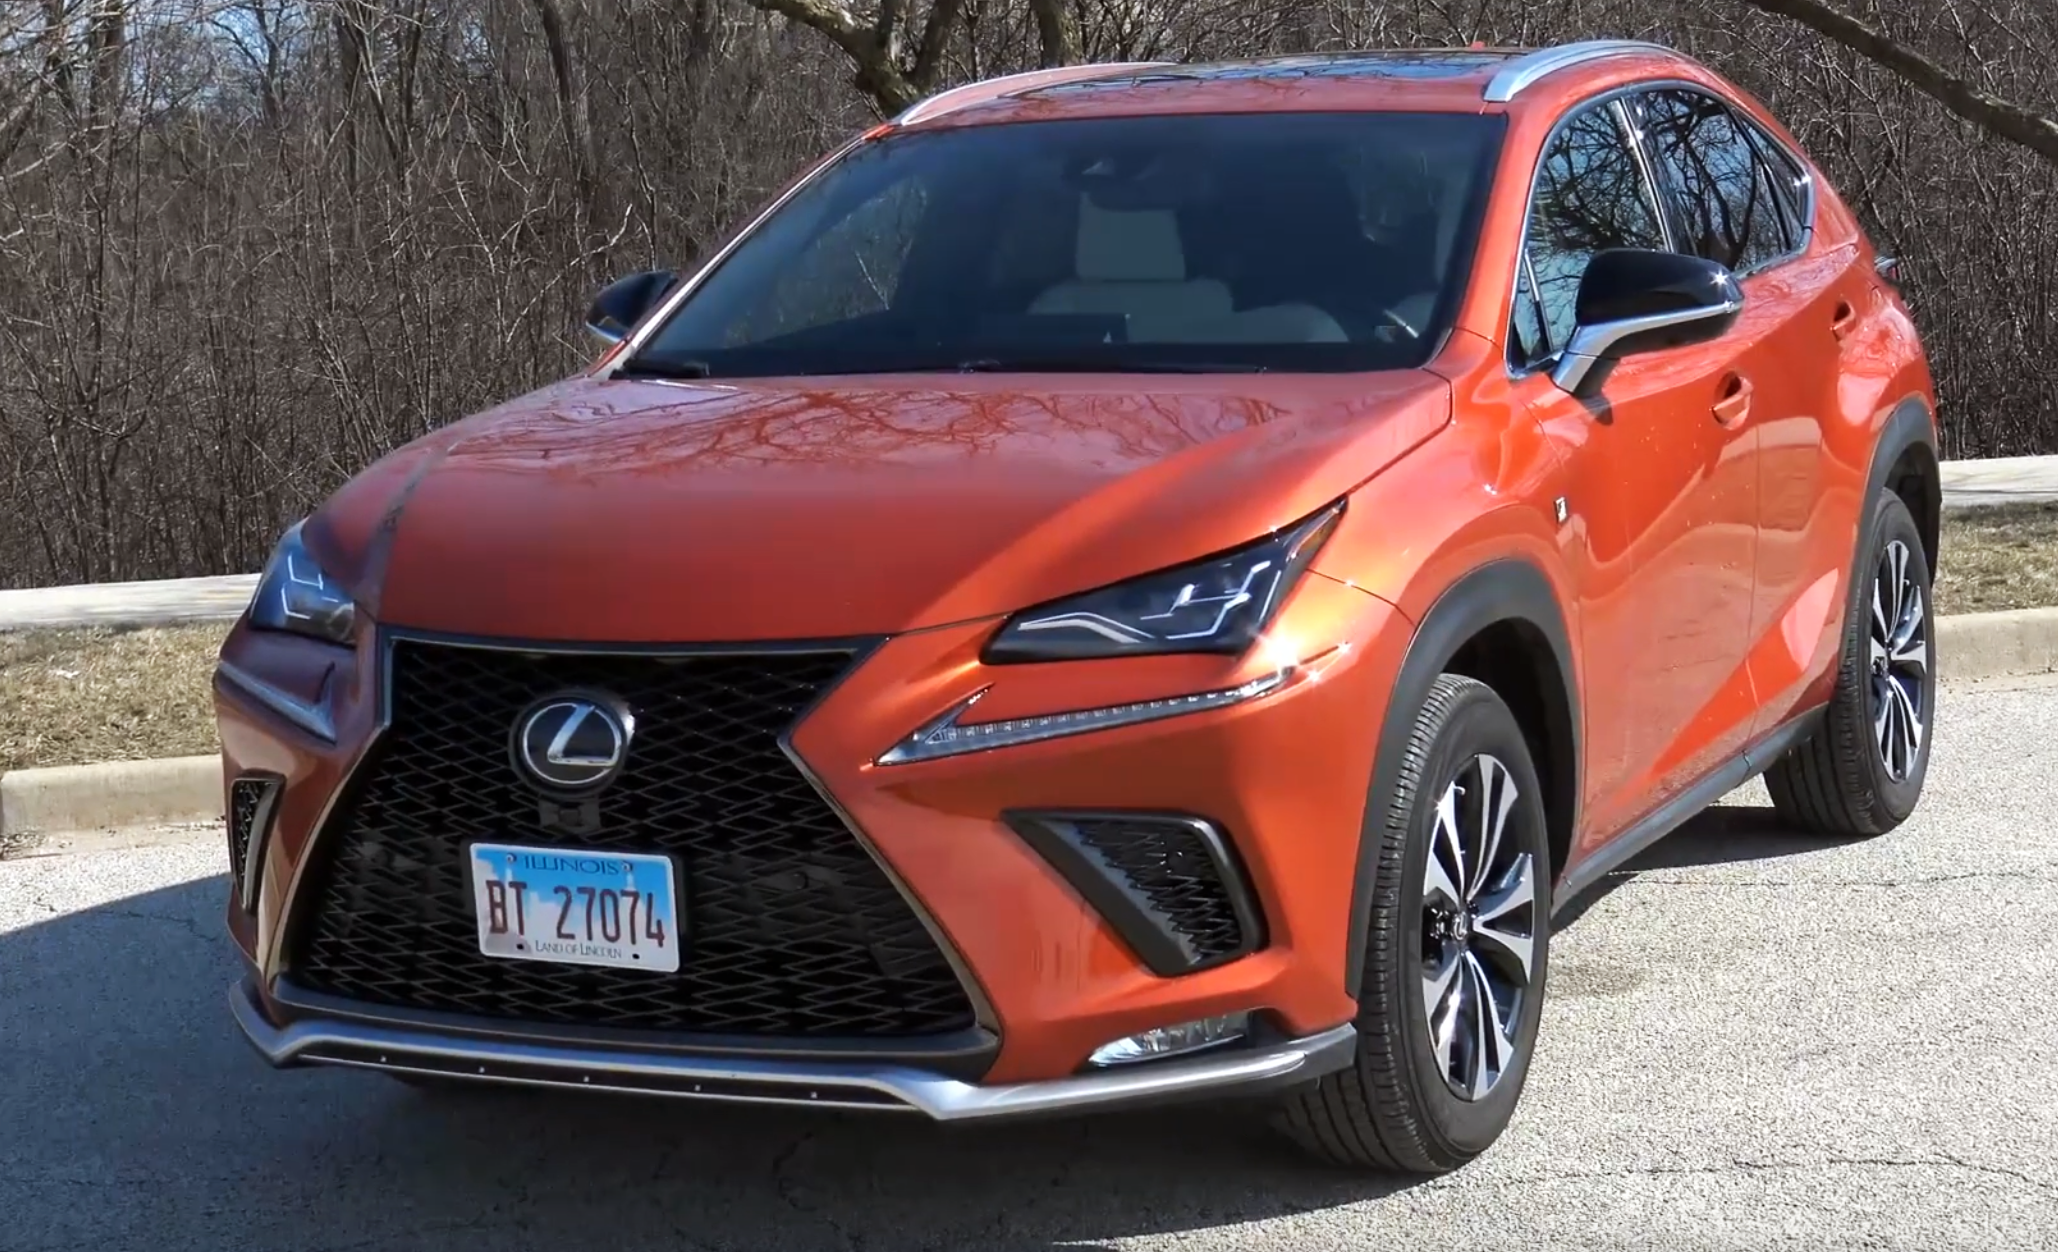 Steve and Johnnie Lexus NX Review